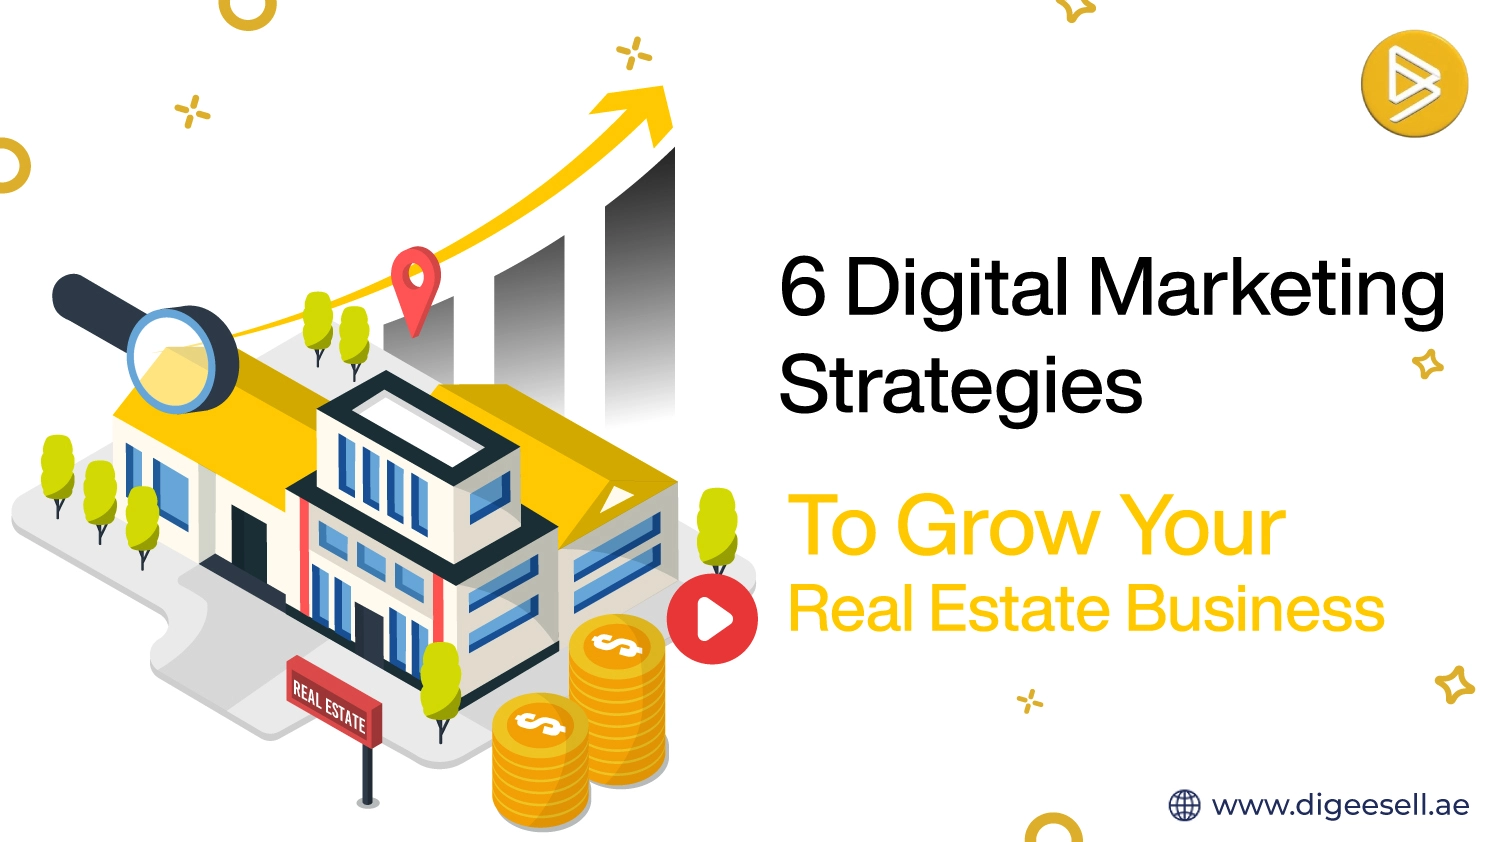 How are the benefits of digital marketing for real estate businesses?